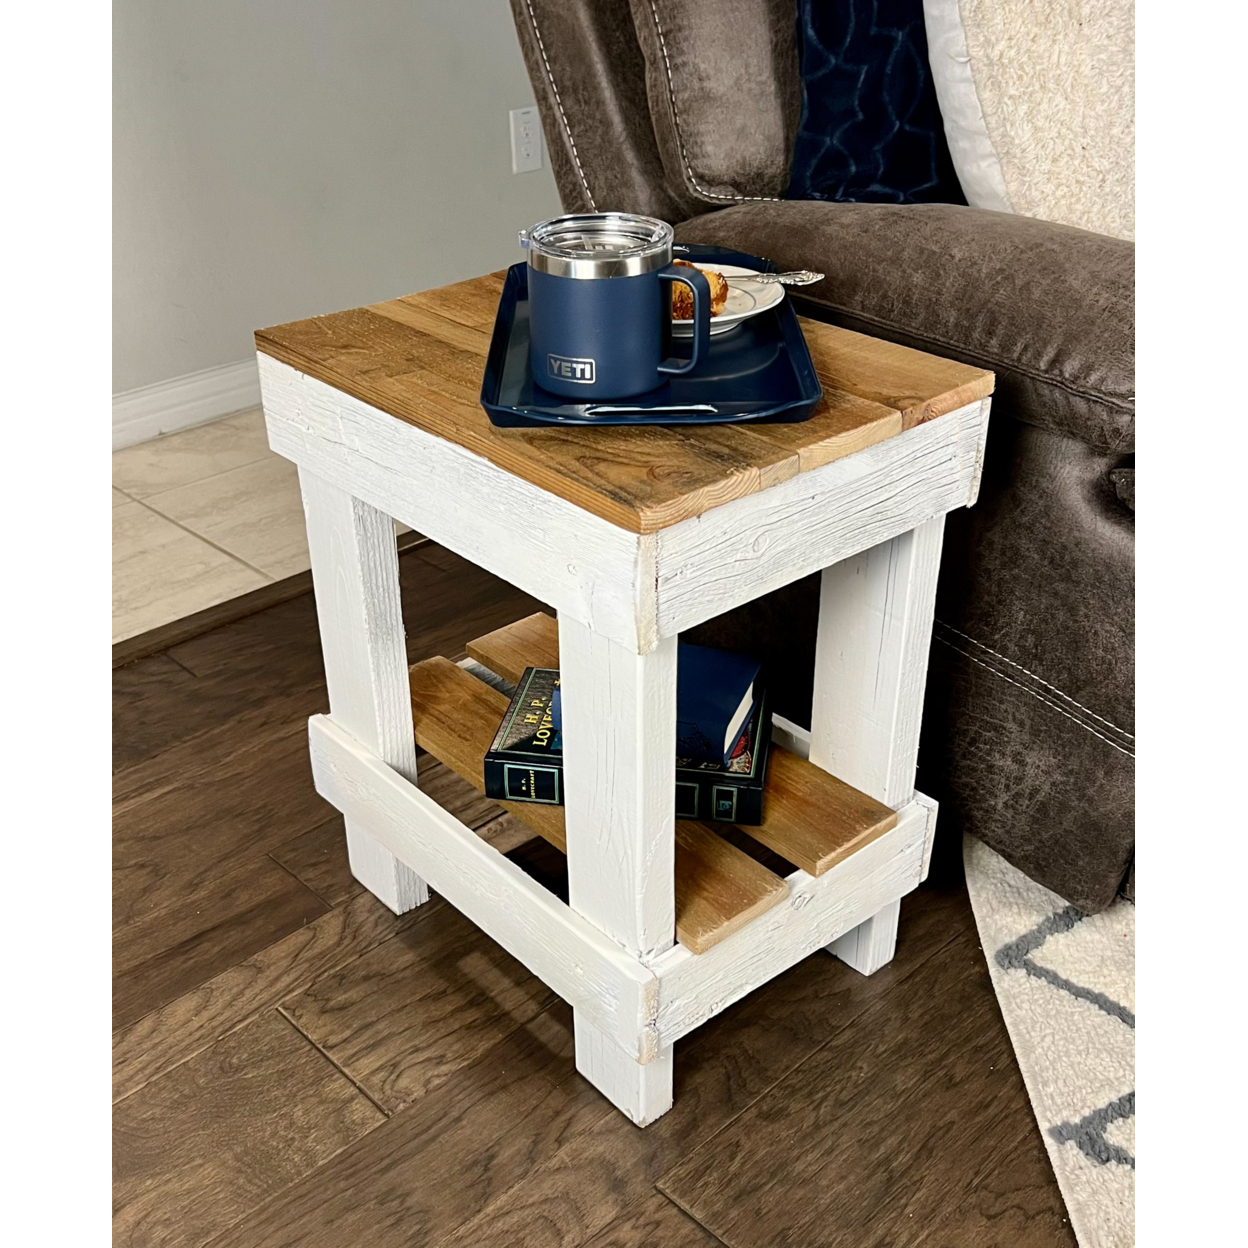 Reclaimed Wood Rustic Bedside or Living Room End Side Table Country Charm Farmhouse Nightstand - Lt Brown/White